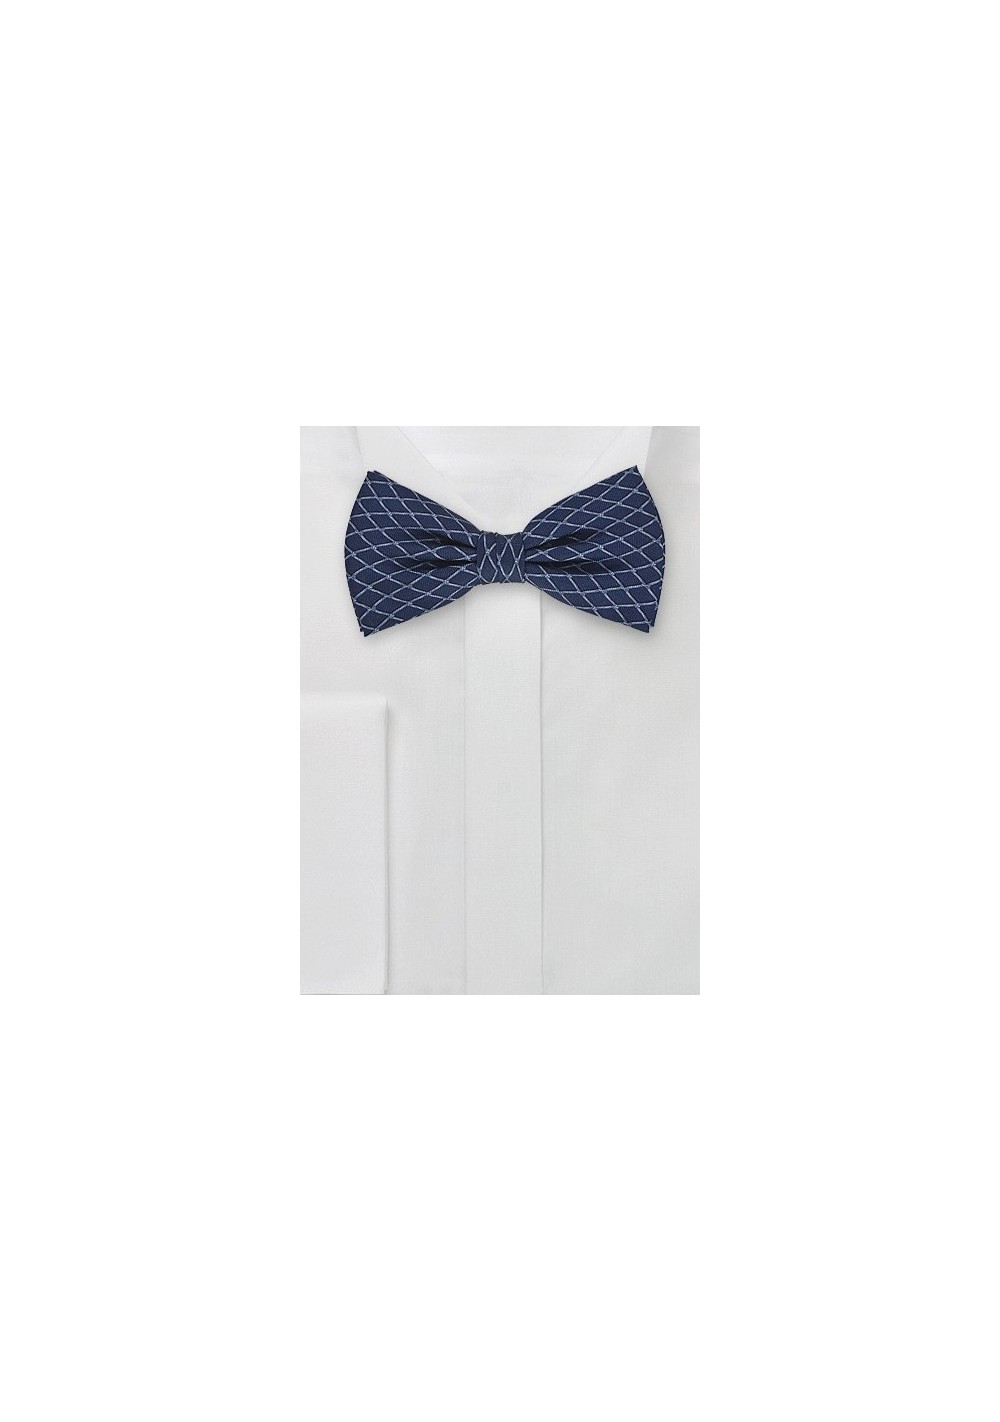 Bow Tie in Navy Blue and Light Blue